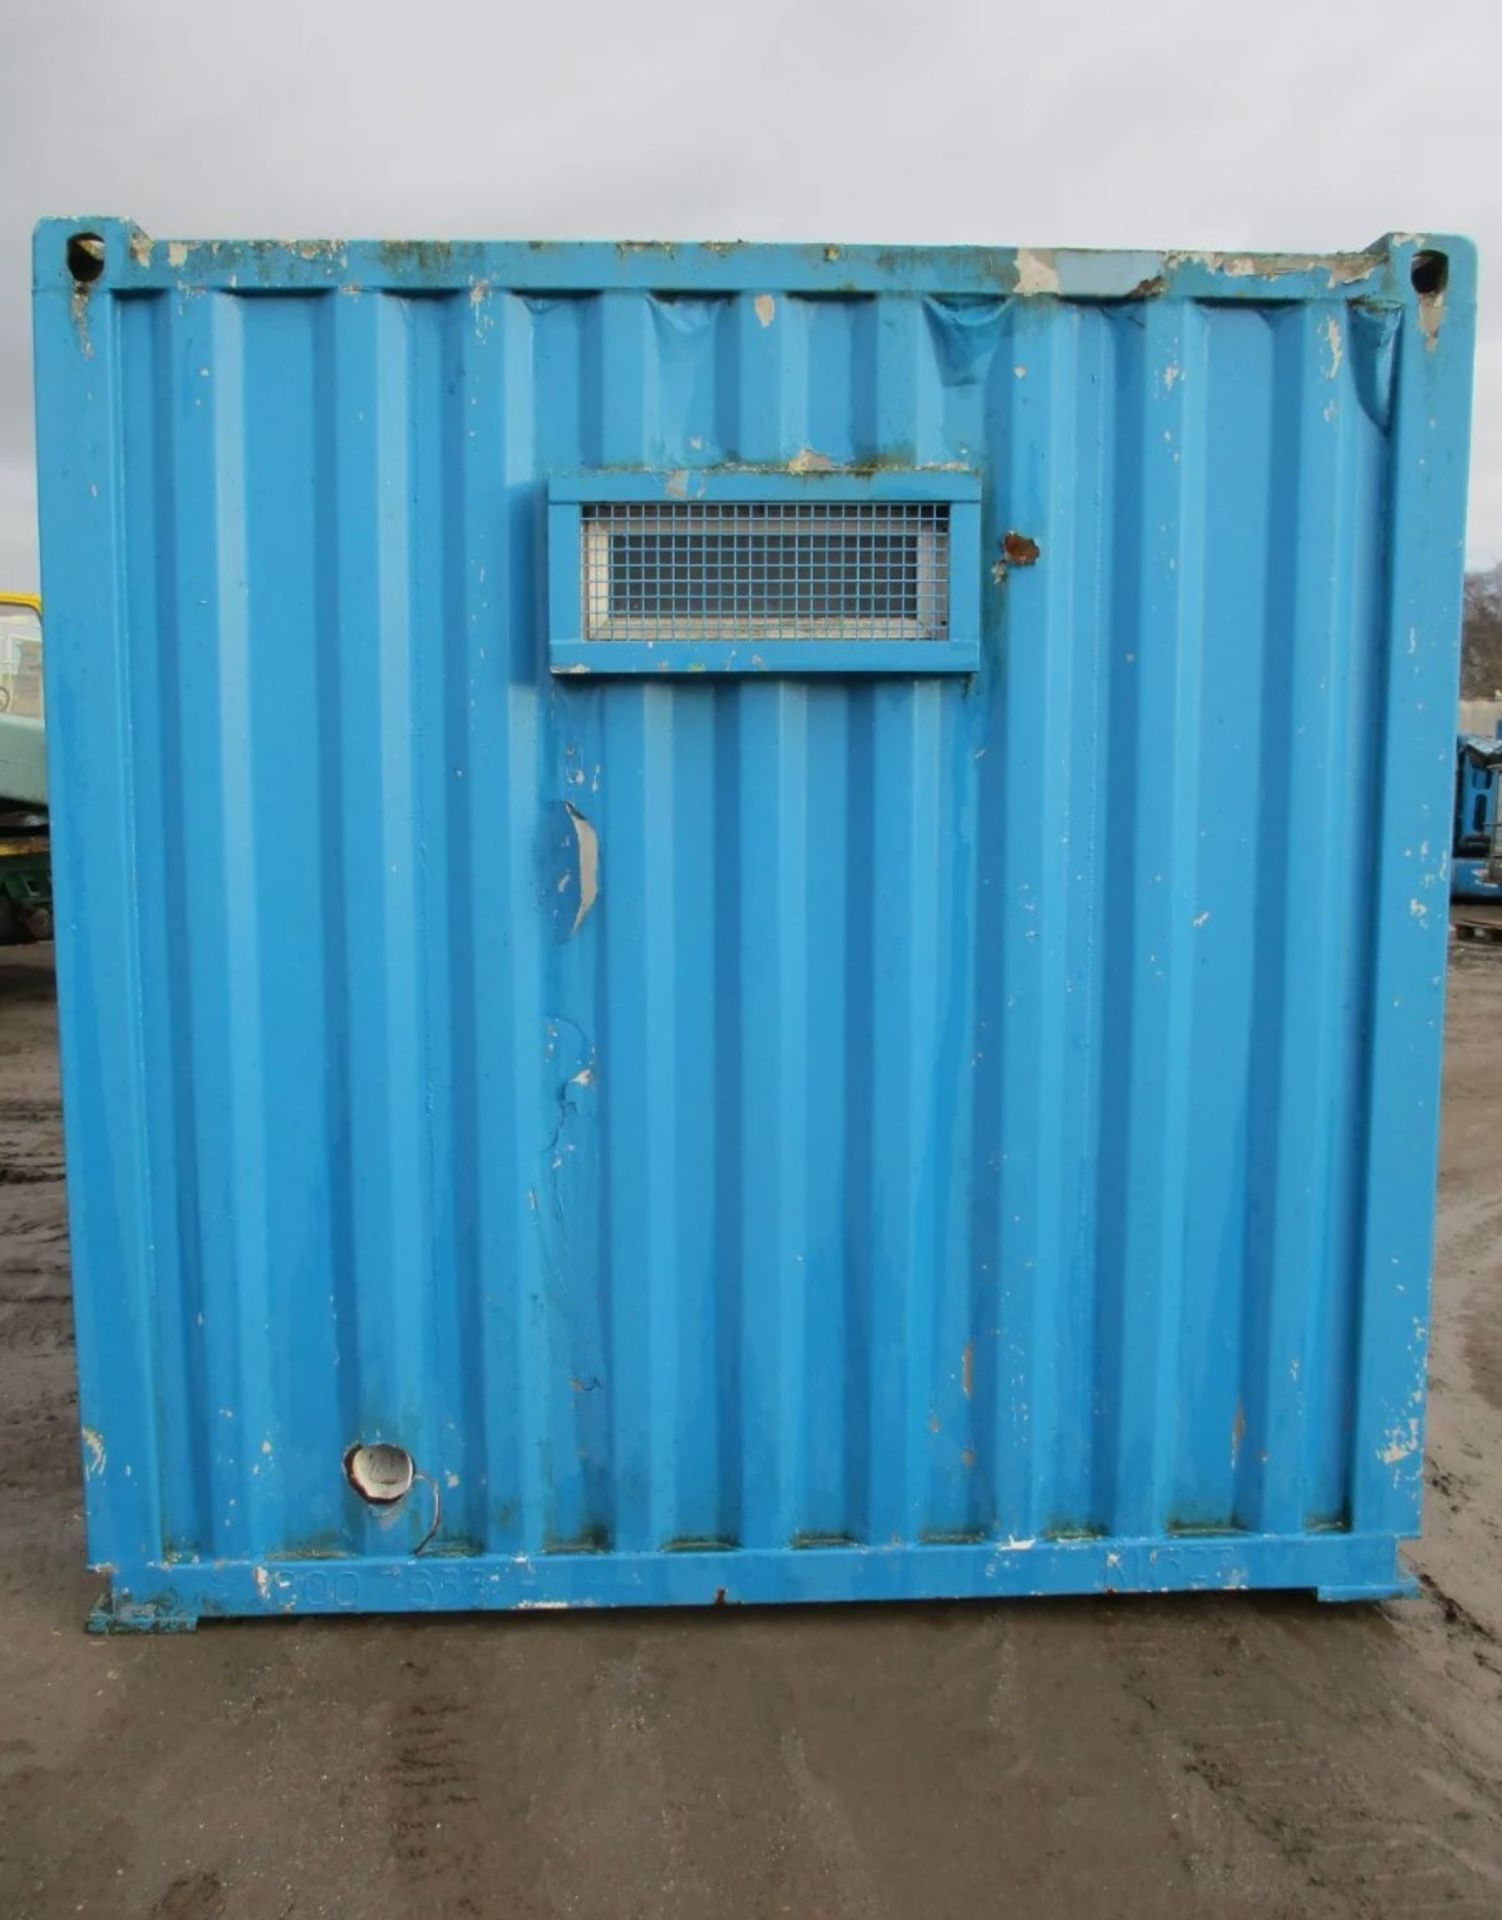 SHIPPING CONTAINER TOILET BLOCK: YOUR COMPLETE PORTABLE SANITATION SOLUTION - Image 4 of 11